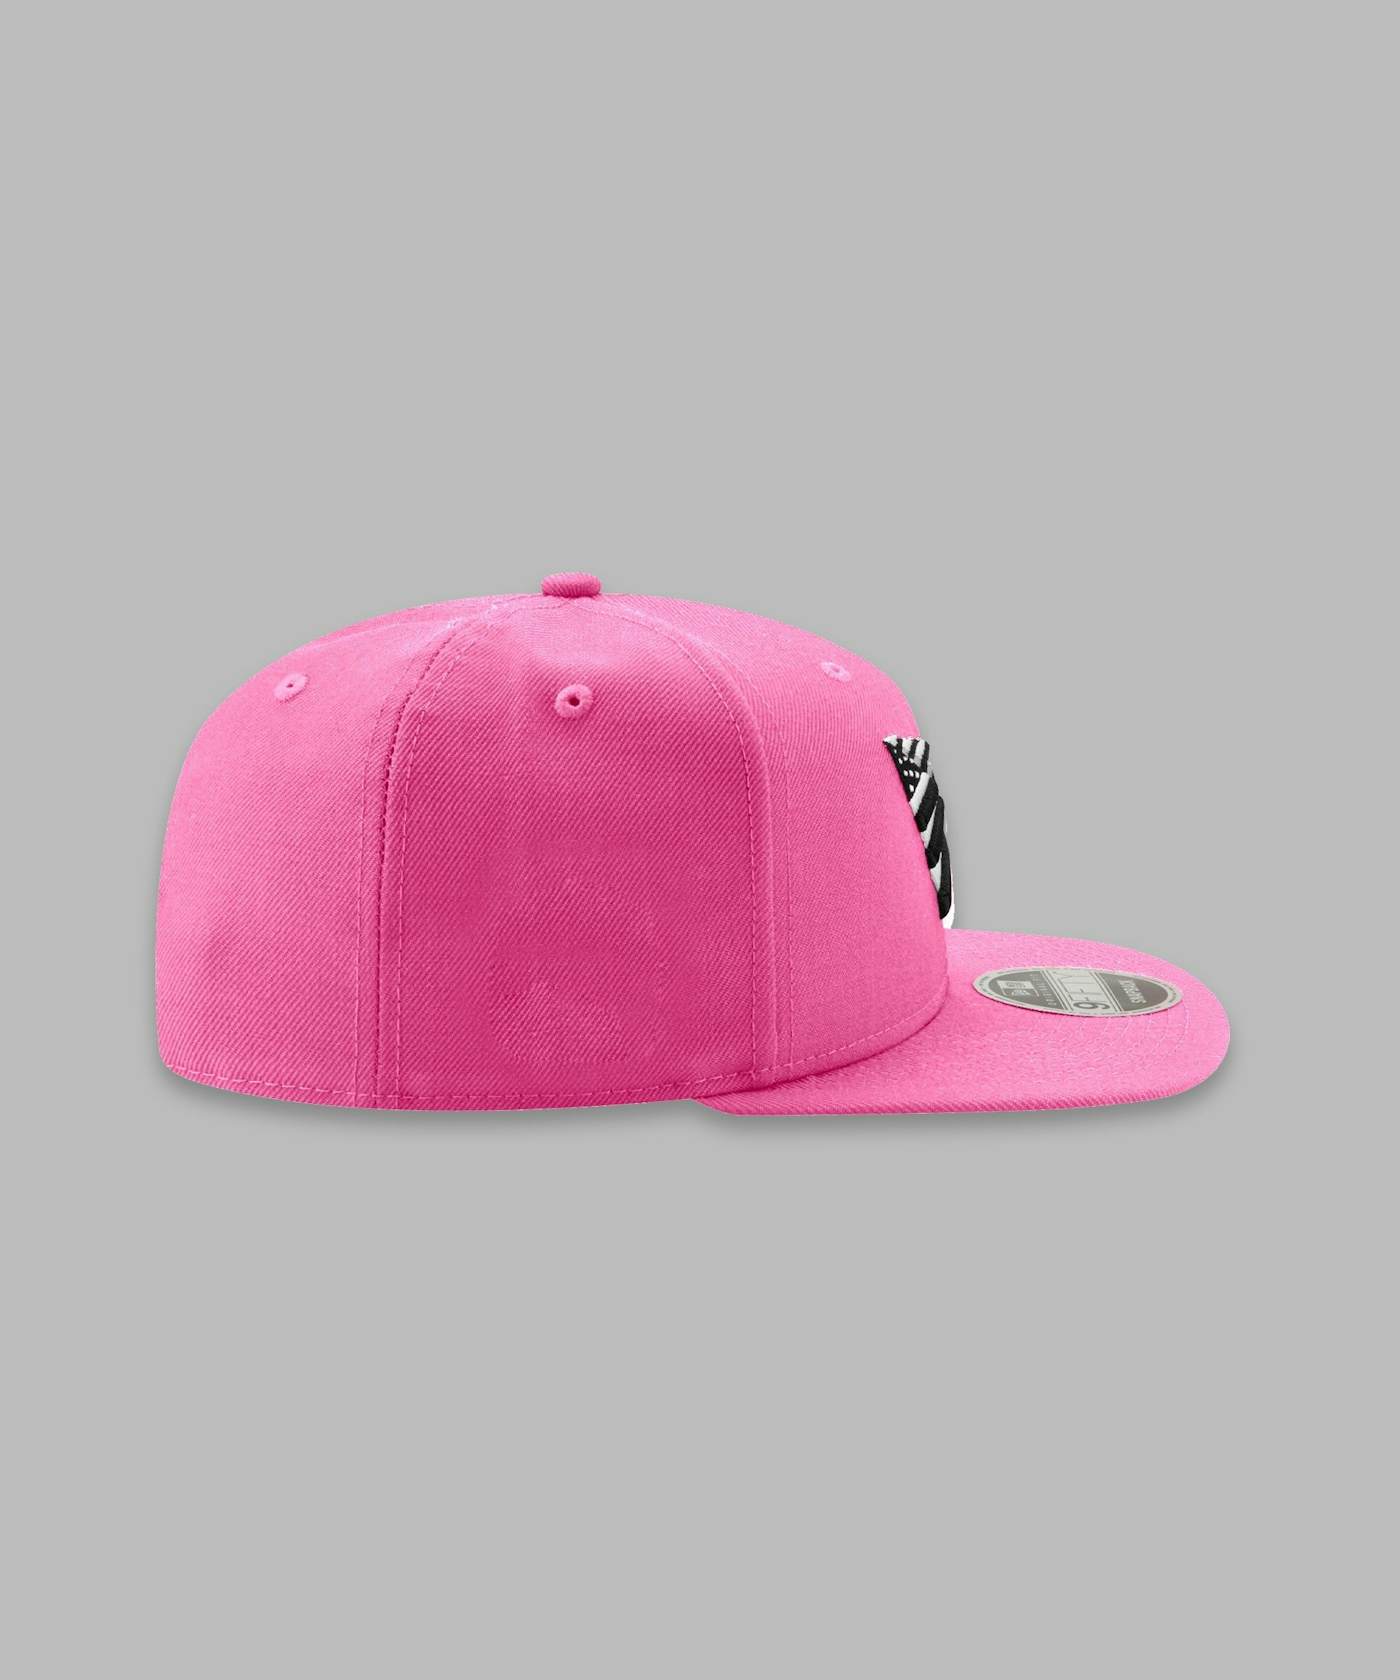 Snapback Crown Pink High On Run 9Fifty The II Hat